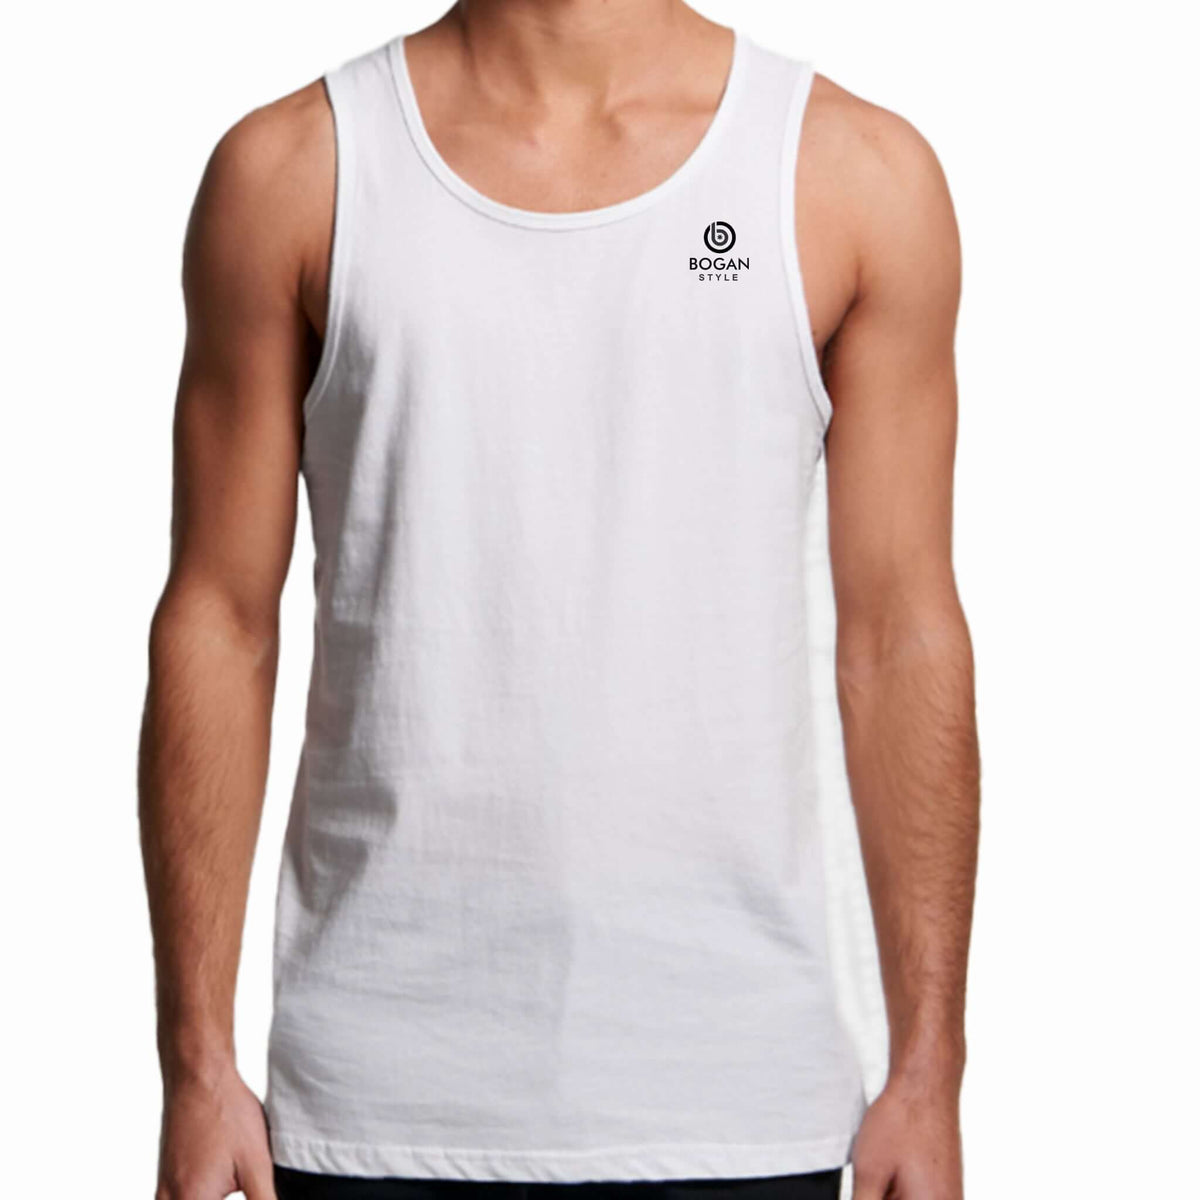 Men's white tank top with small Bogan Style logo on chest.